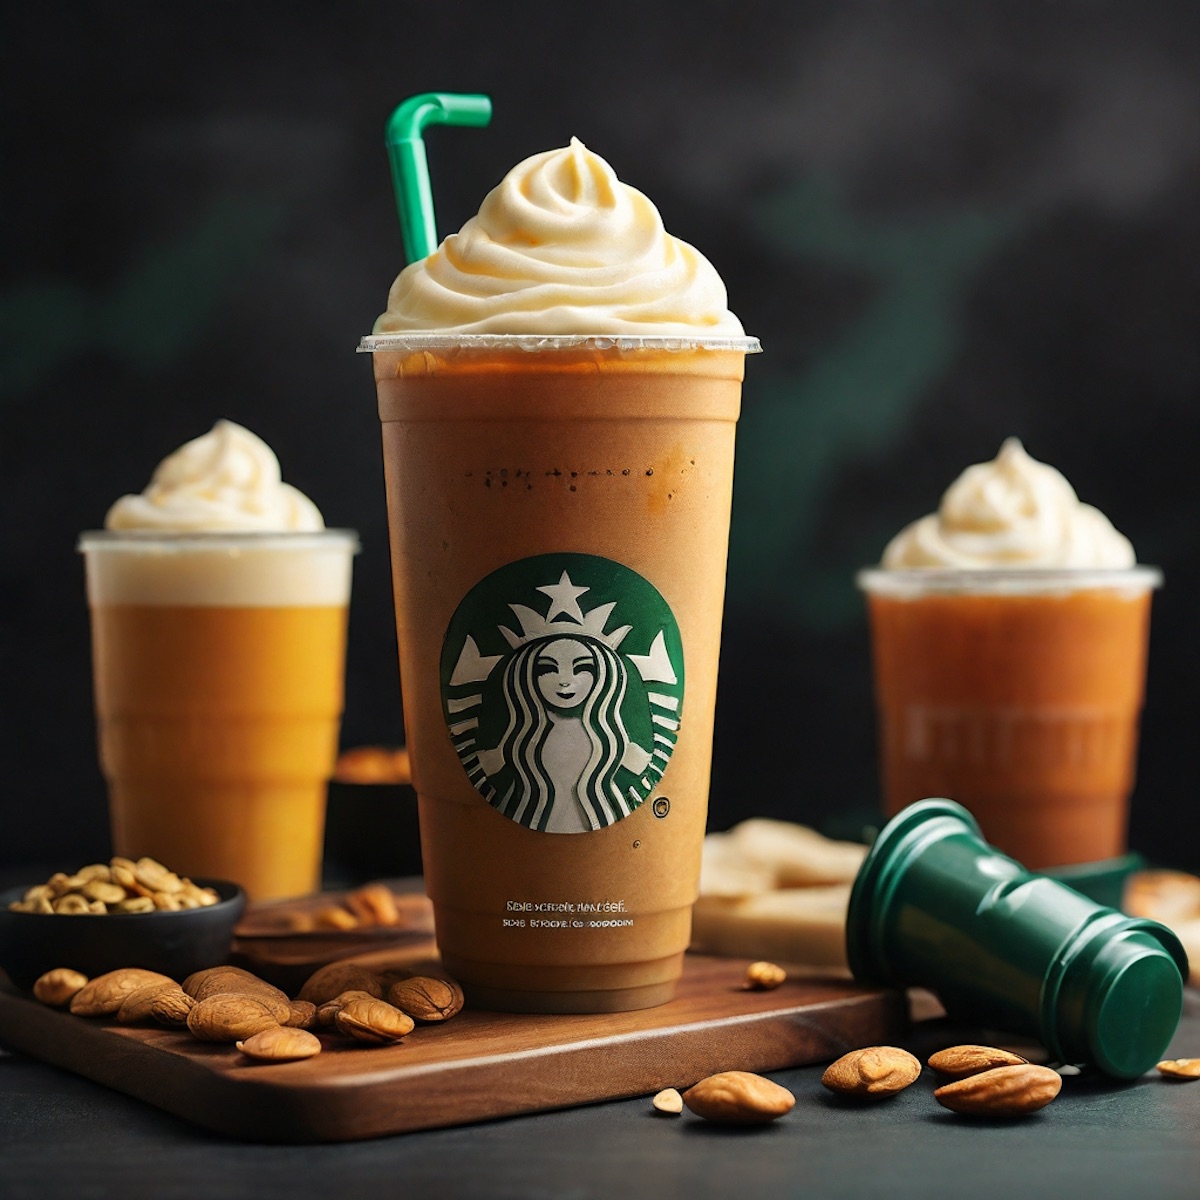 How to Order: Keto Starbucks Drinks and Food Guide